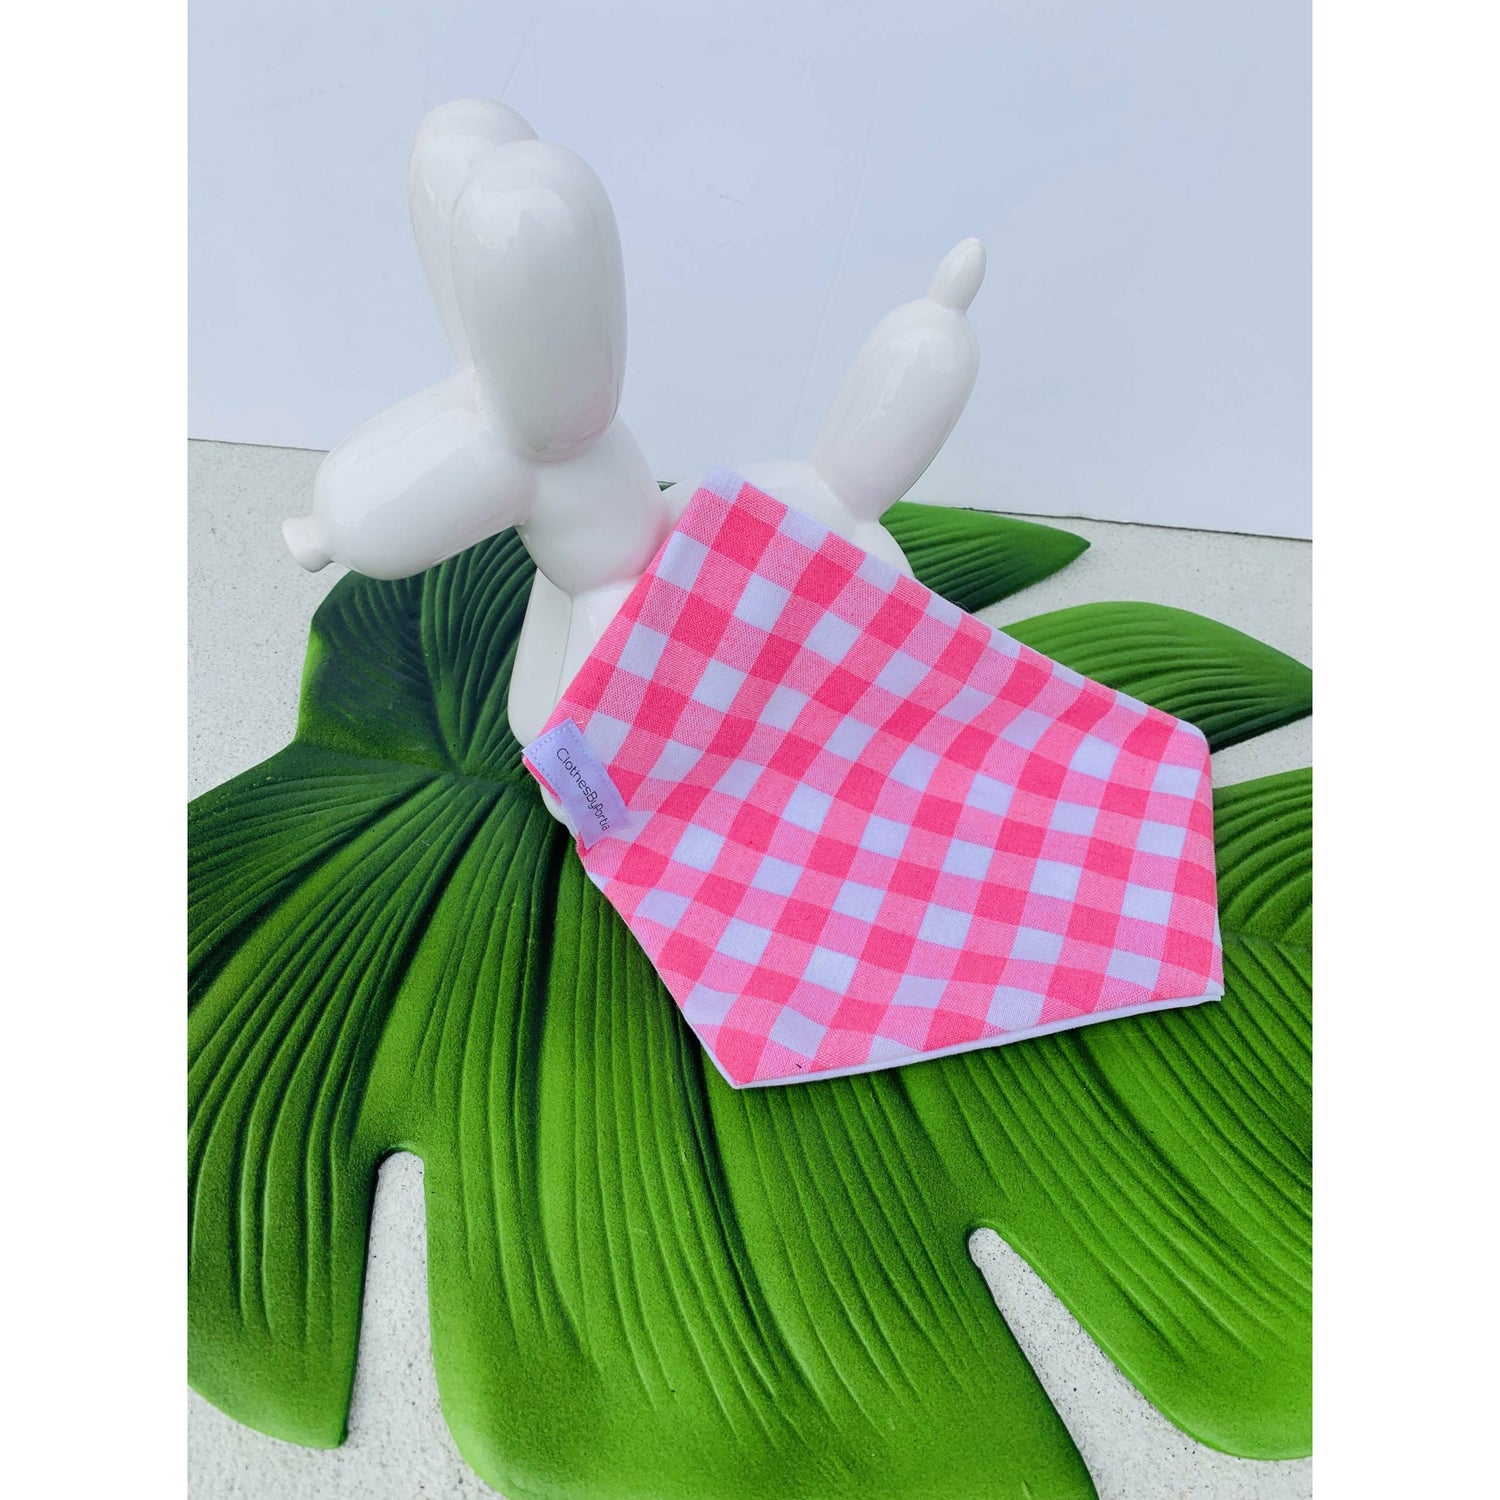 candy pink gingham dog bandana made in New Zealand